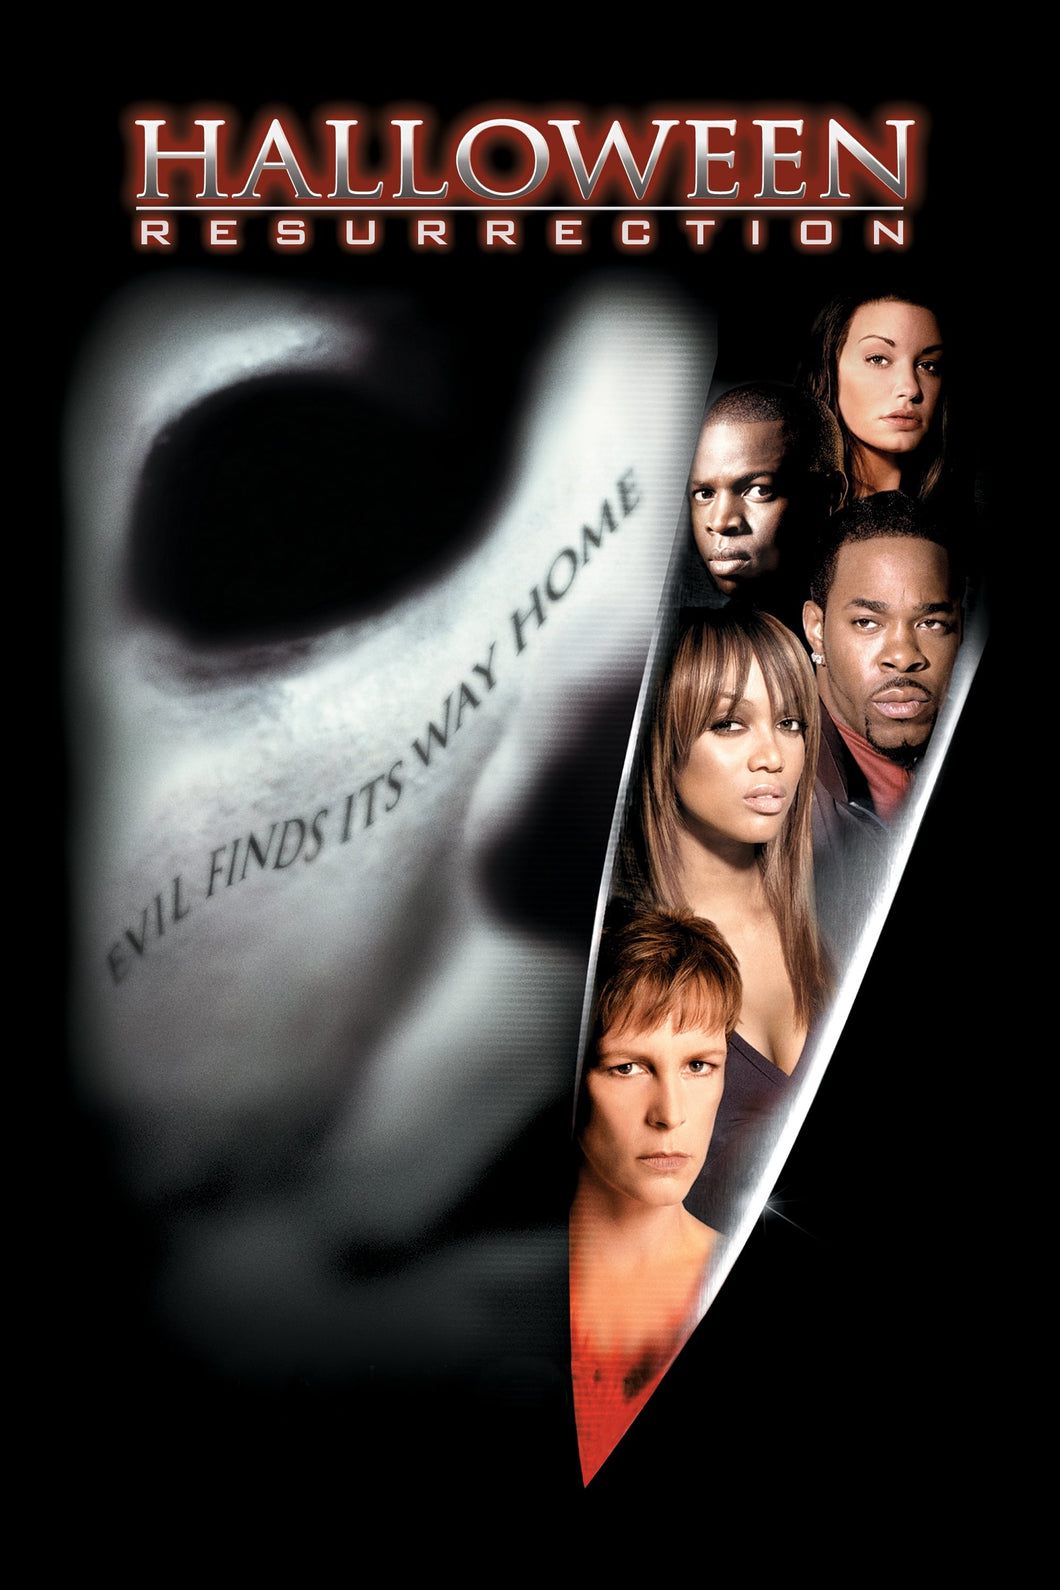 Halloween  Resurrection (2002)  Movie Poster High Quality Glossy Paper A1 A2 A3 A4 A3 Framed or Unframed!!!